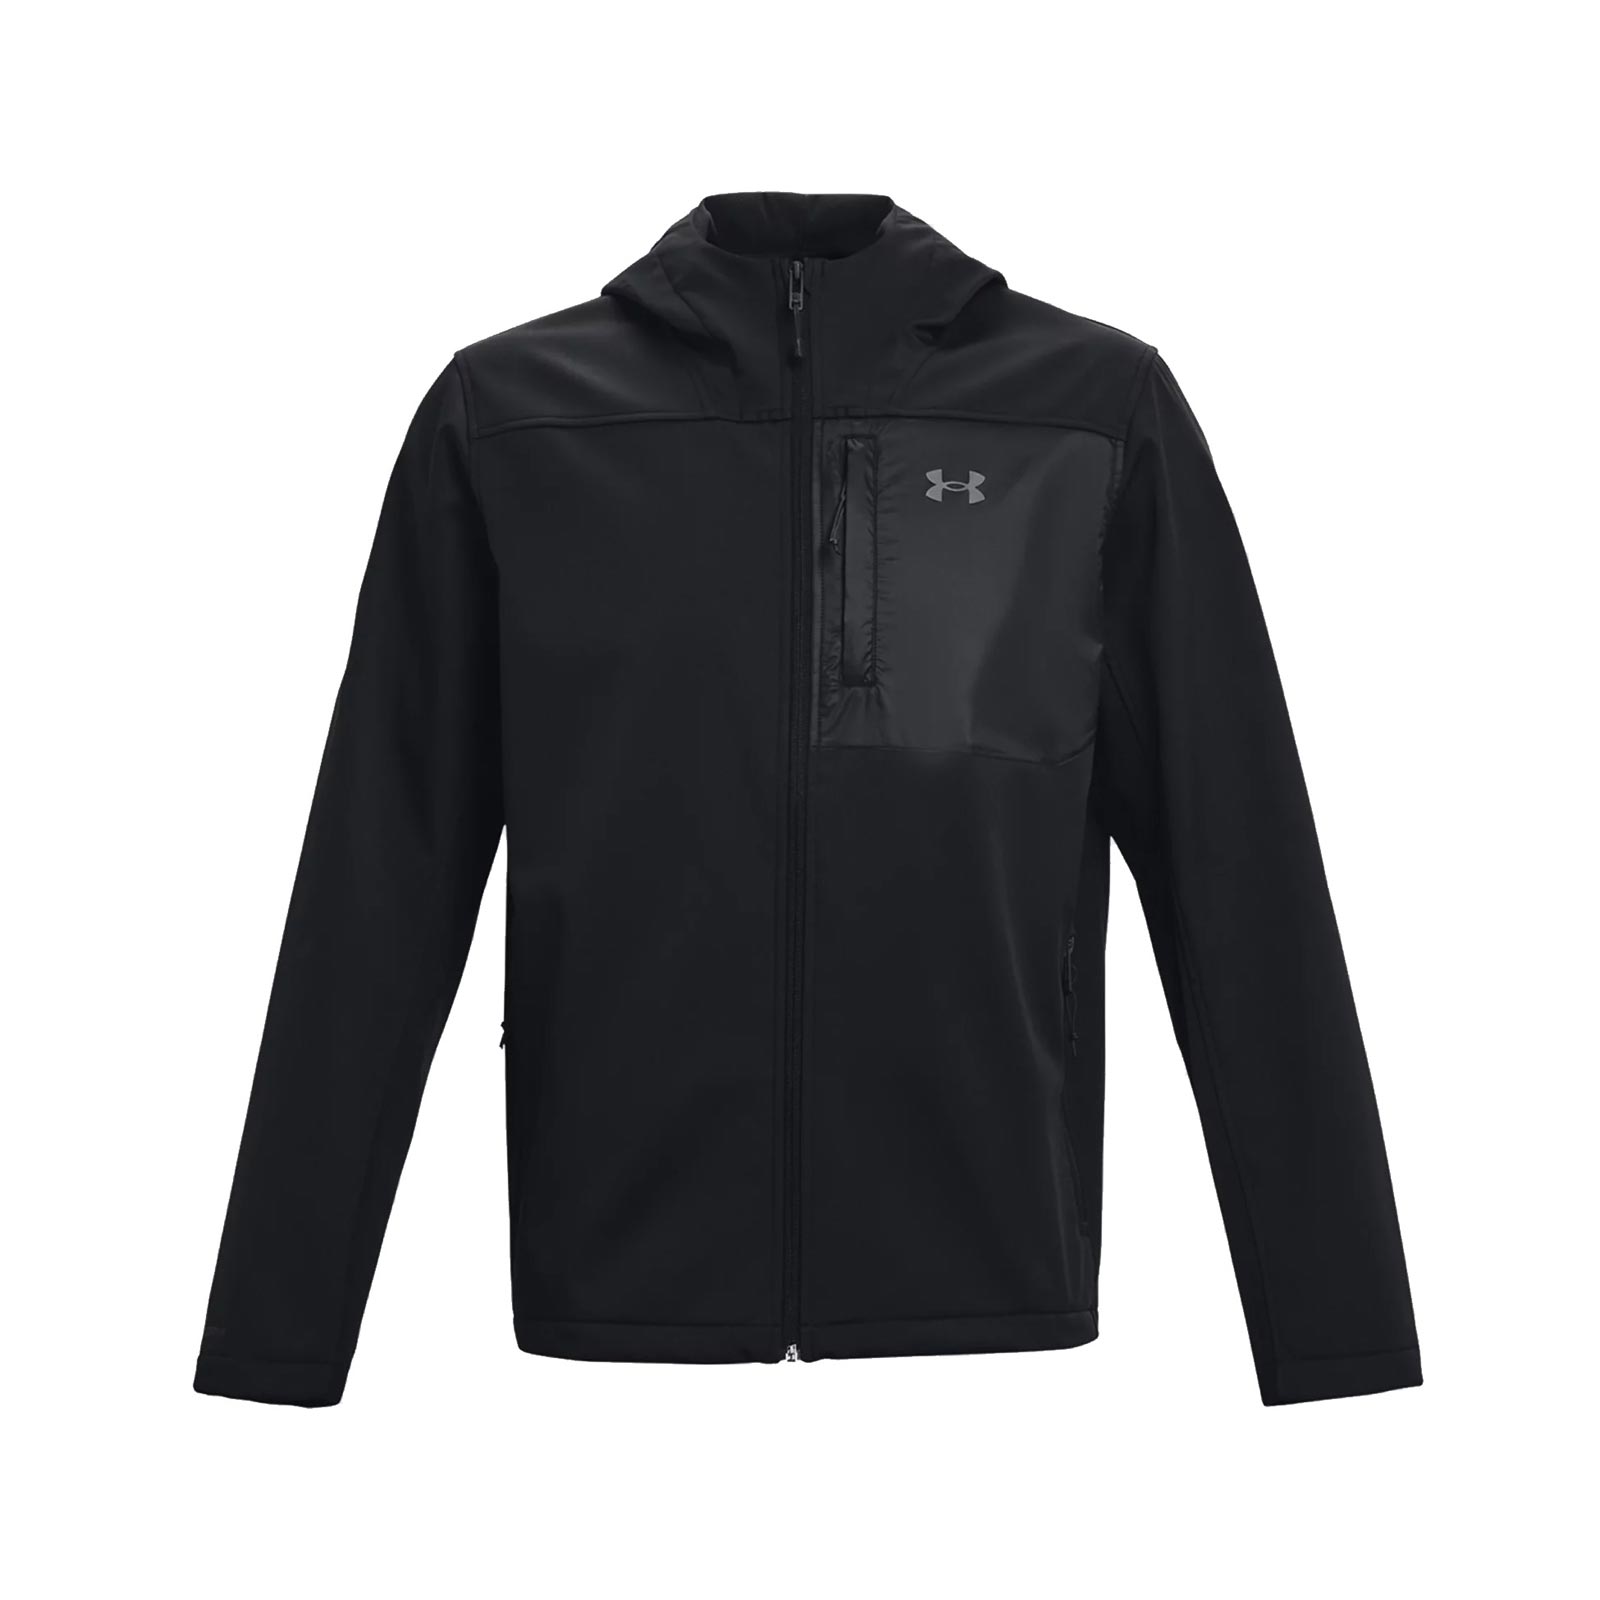 UNDER ARMOUR STORM COLDGEAR INFRARED SHIELD 2.0 MENS HOODED JACKET